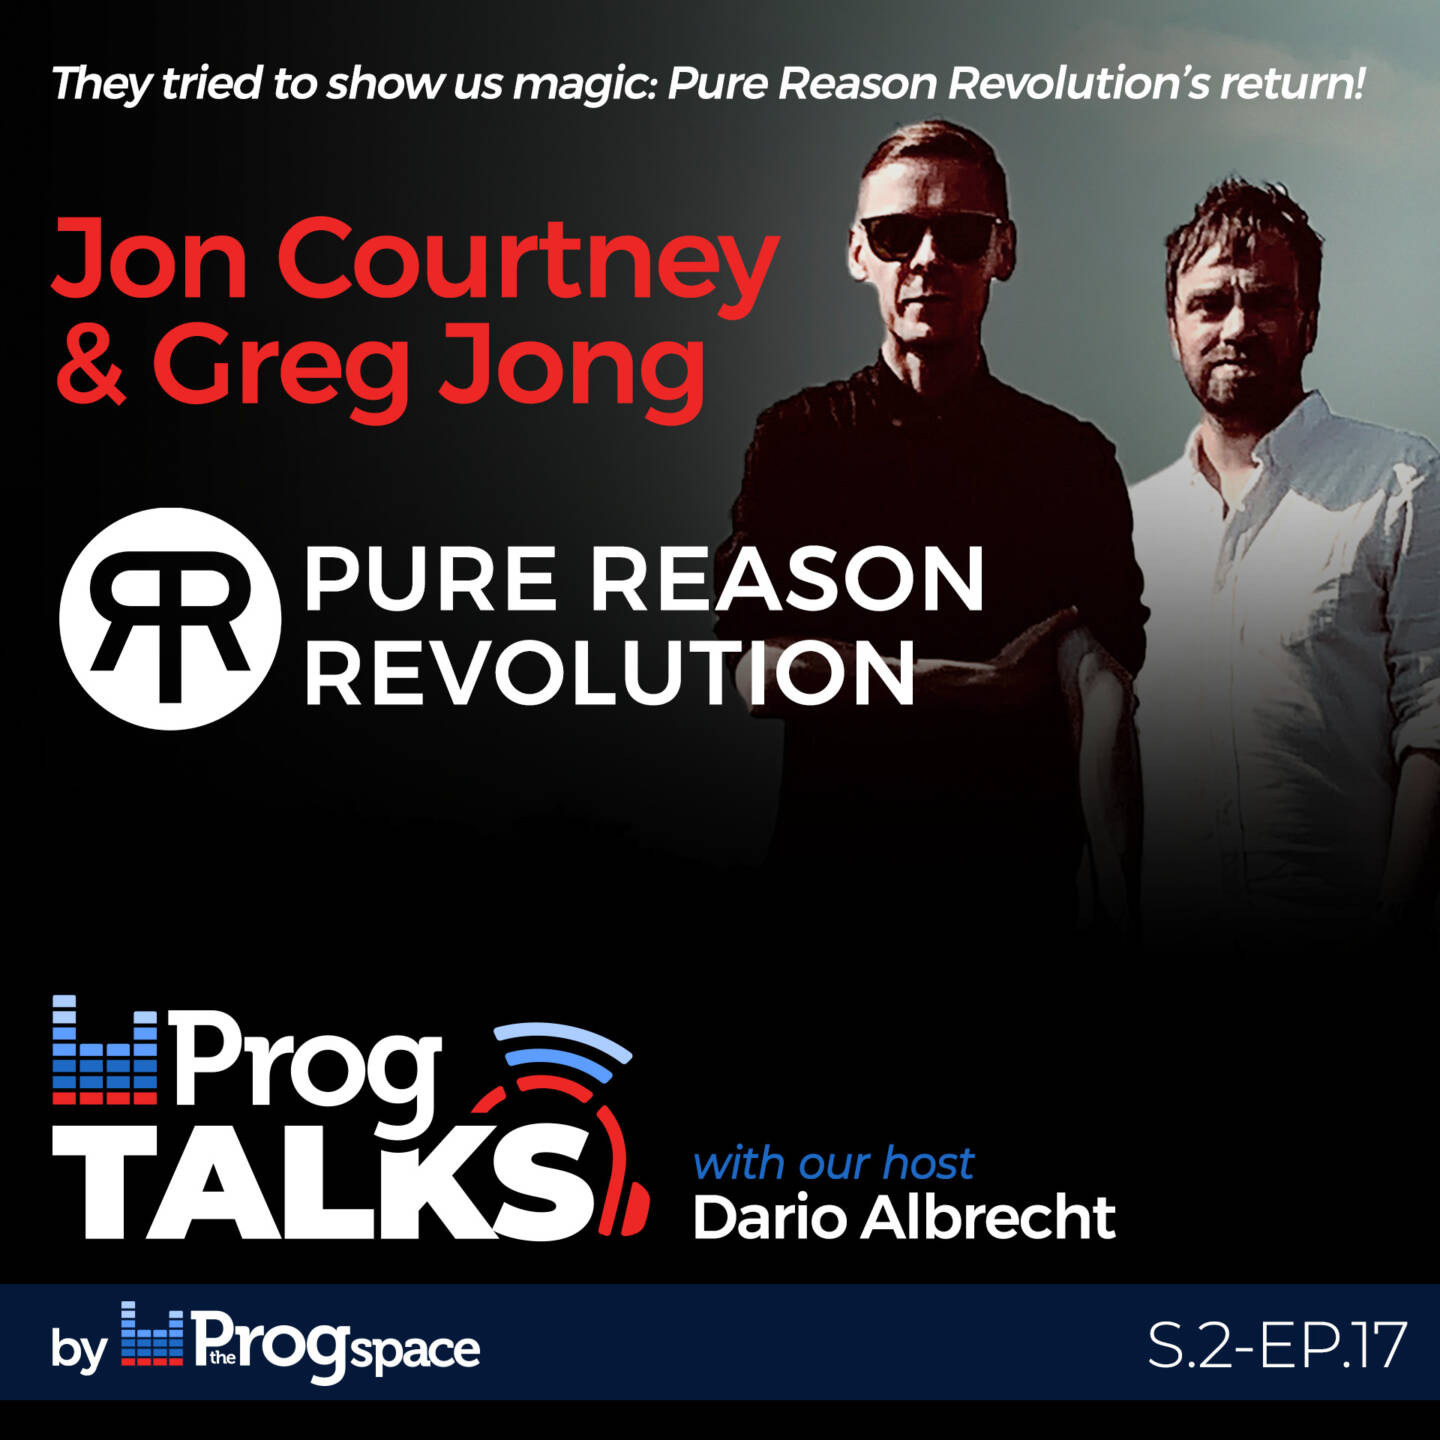 They tried to show us magic: Pure Reason Revolution’s return!